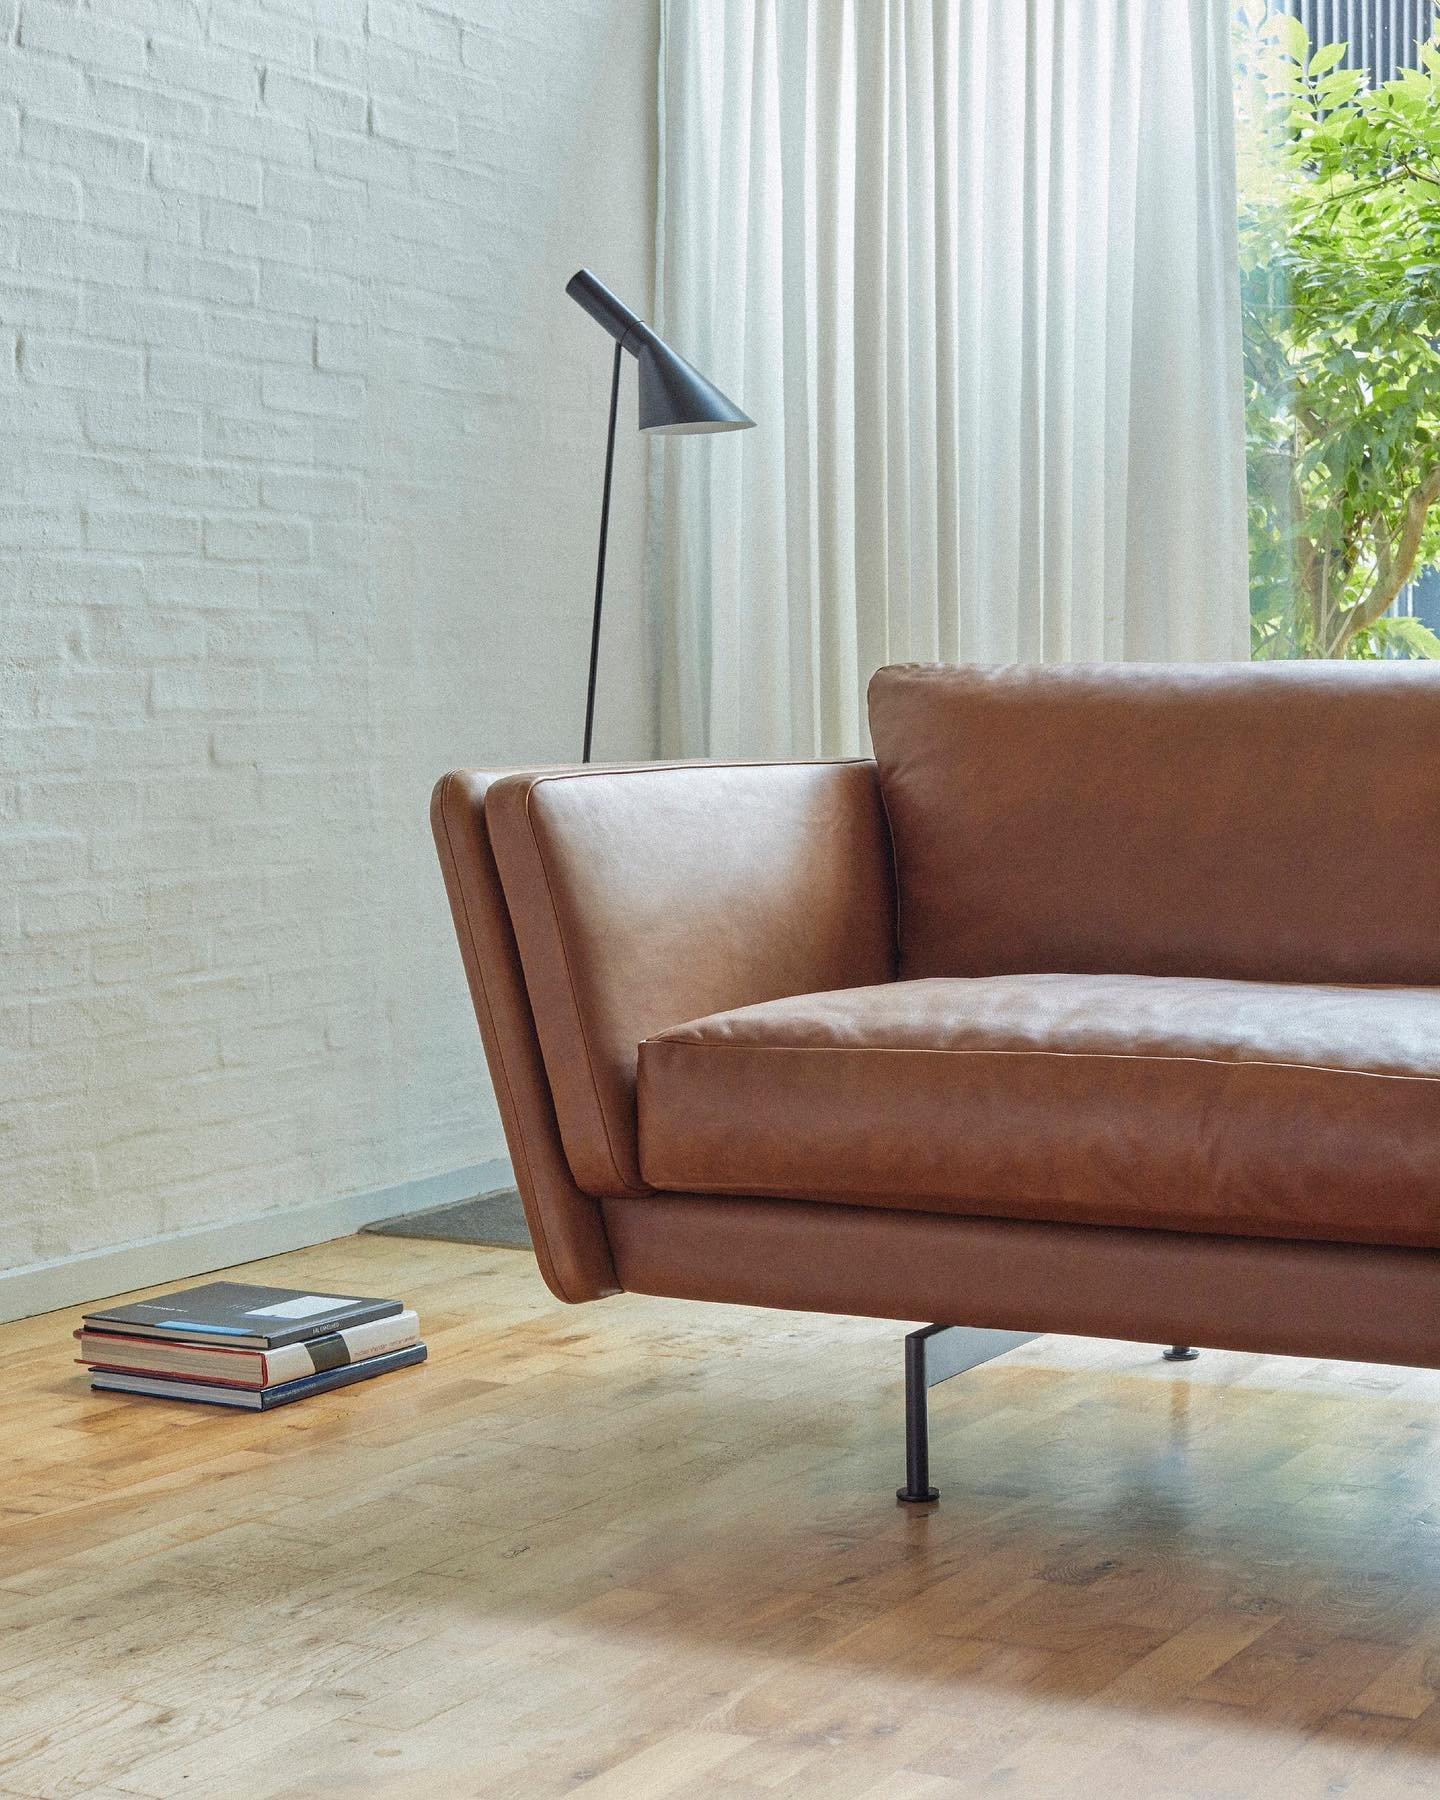 We are introducing our newest design GRASP at @3daysofdesign. Grasp is designed for @mogenshansendenmark. The design is Scandinavian, modern and pure - A new interpretation of the mid-century Danish design sofas. The distinct and architectural clean 